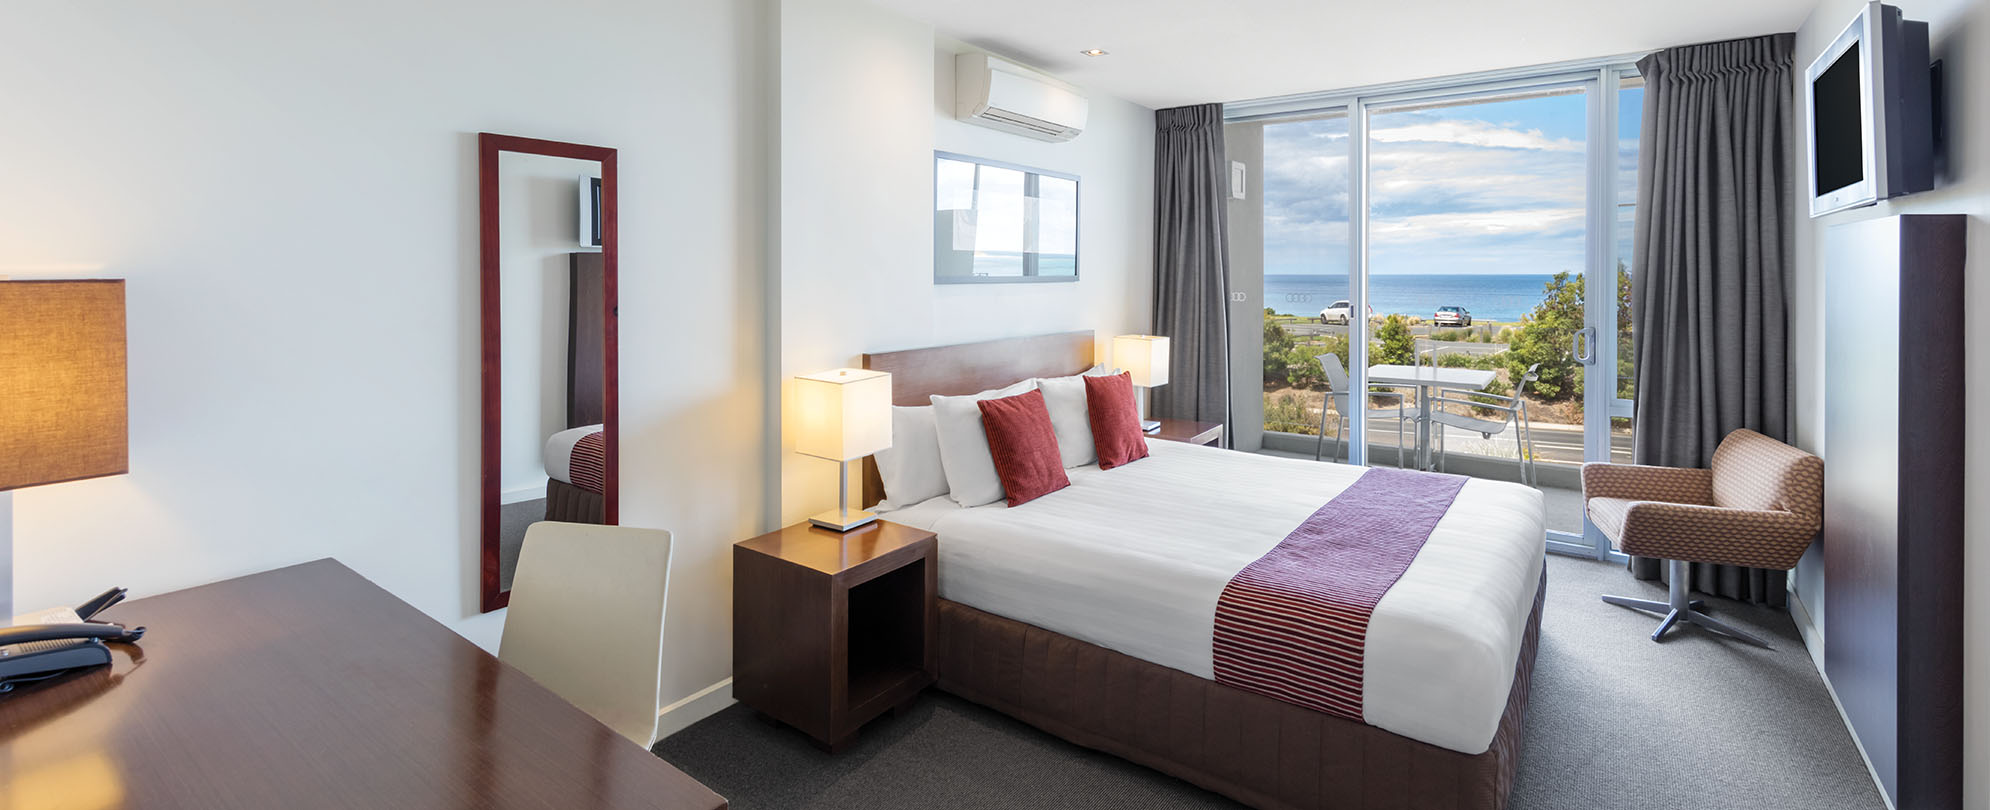 The bedroom inside a studio suite, with an ocean view at Club Wyndham Torquay.  